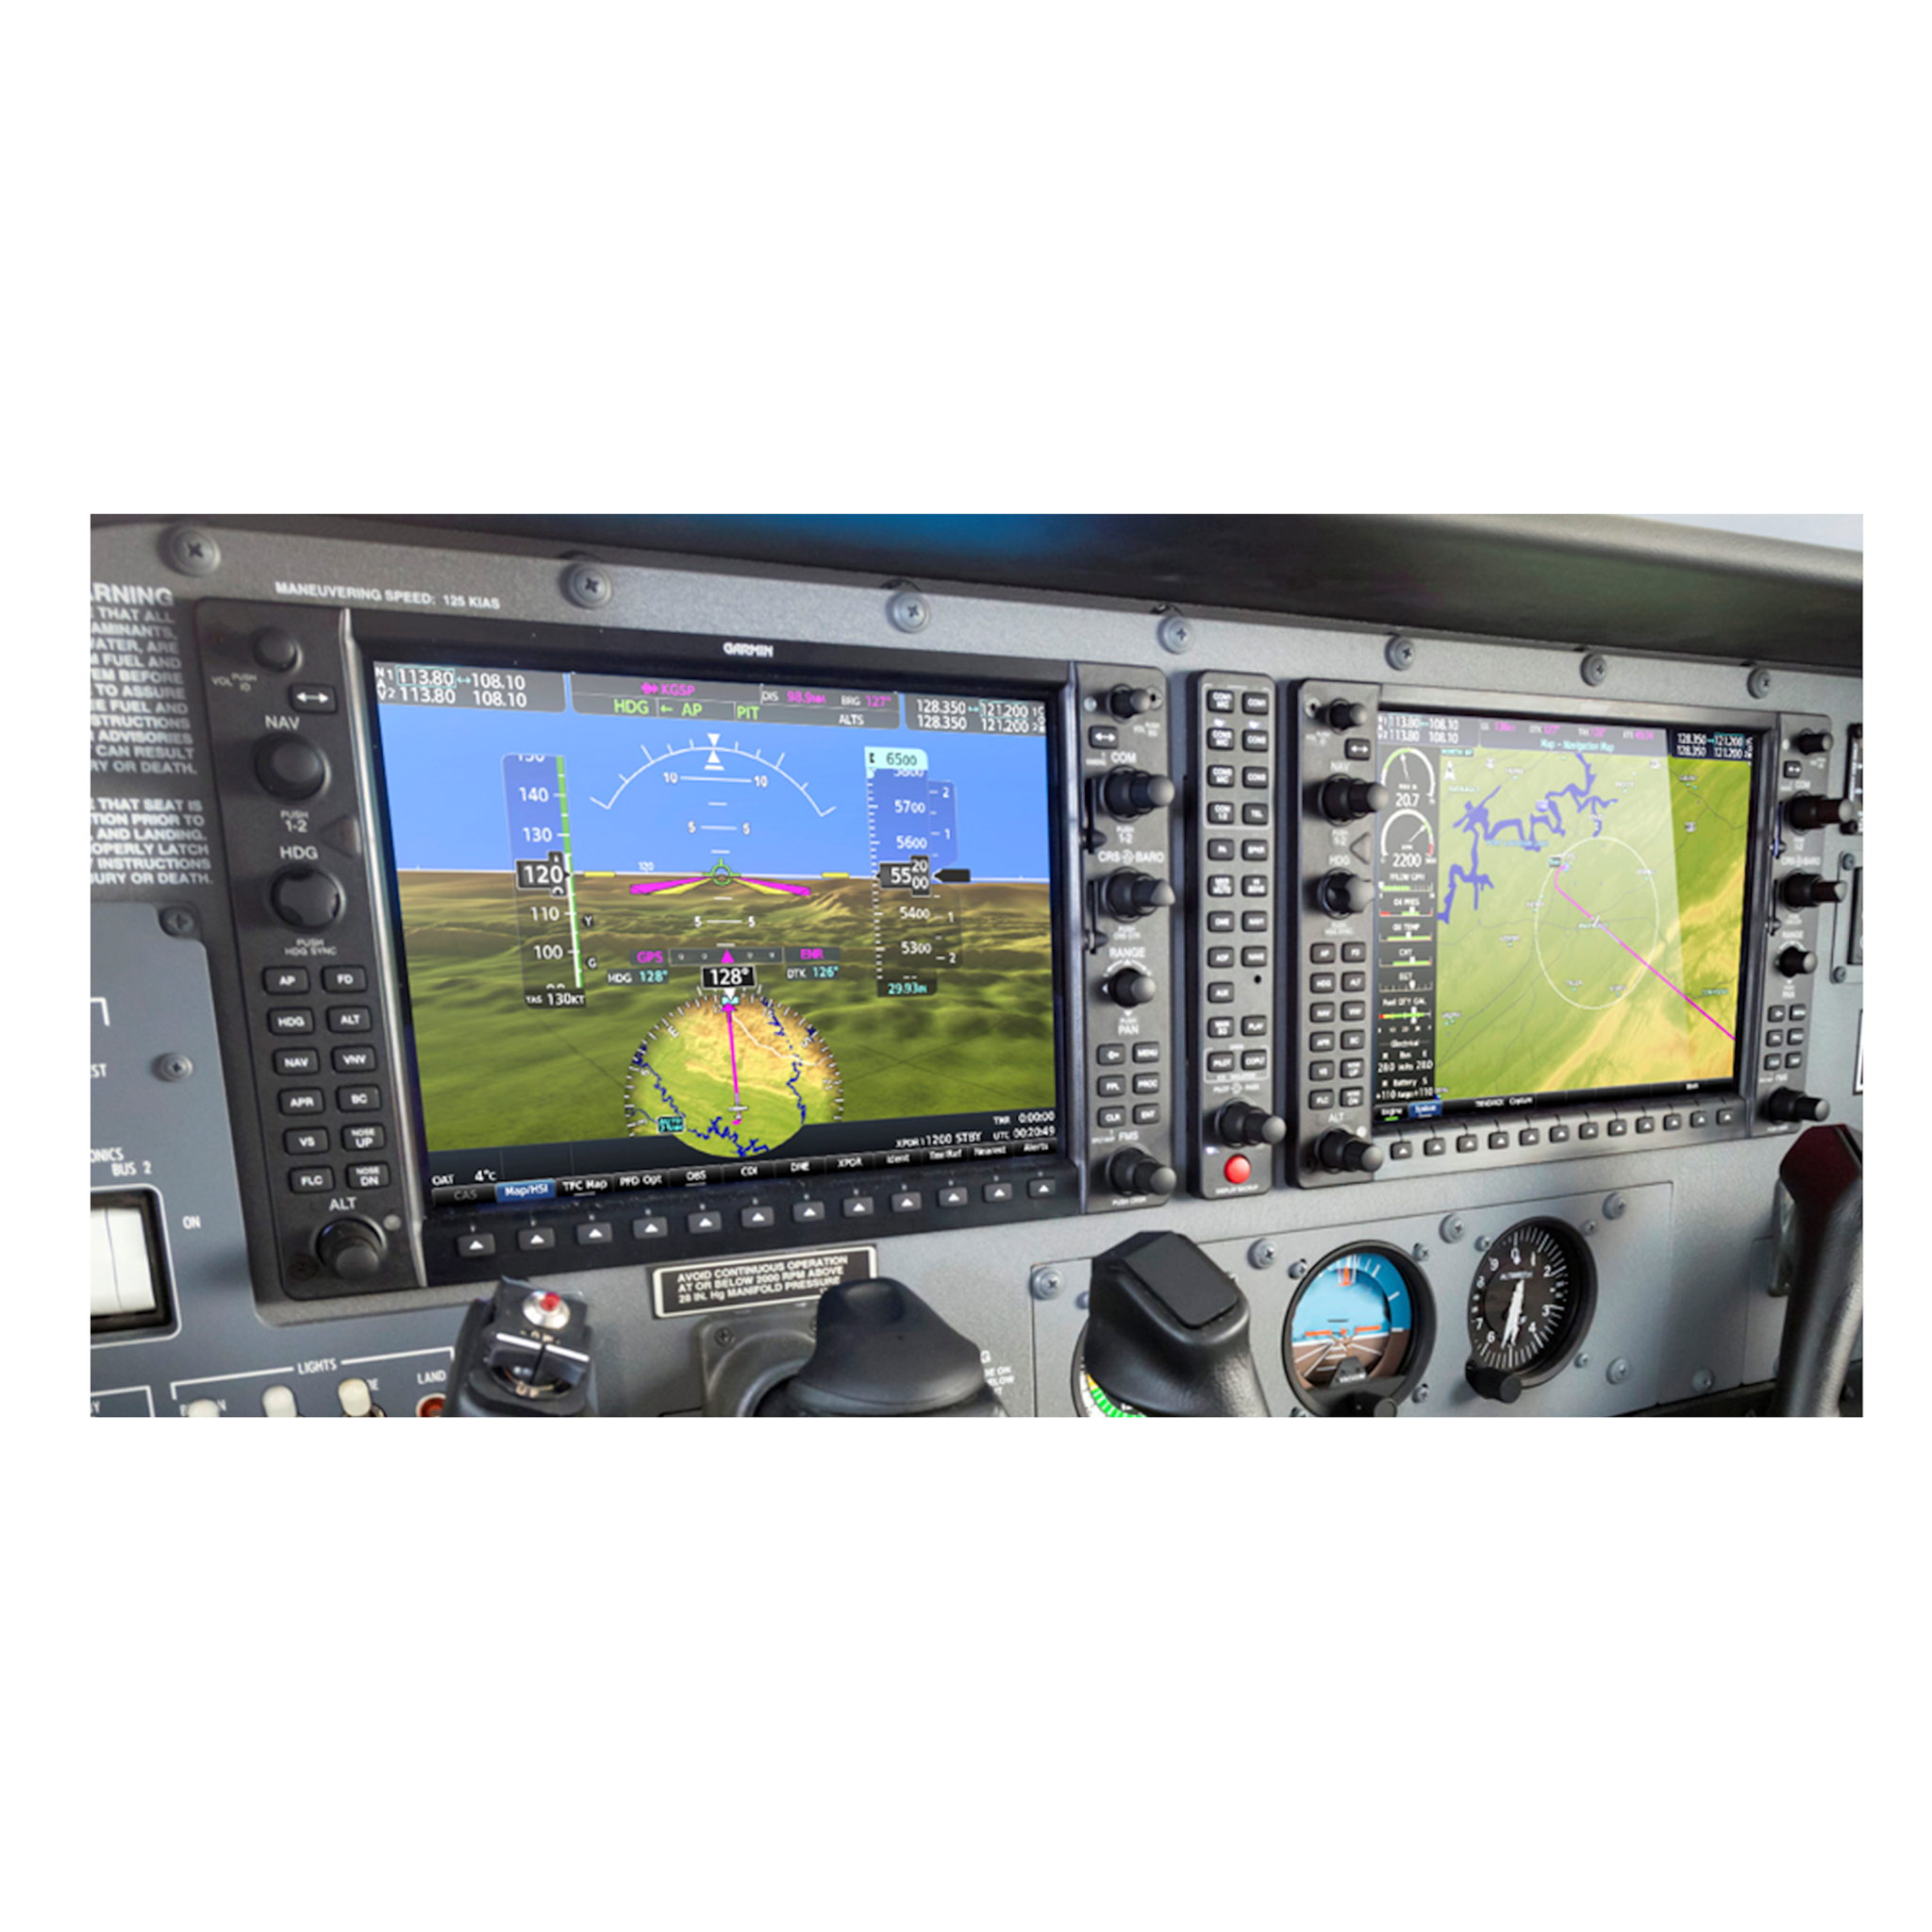 Picture of G1000® to G1000® NXi Upgrade for Cessna T206H Turbo Stationair , Picture 1